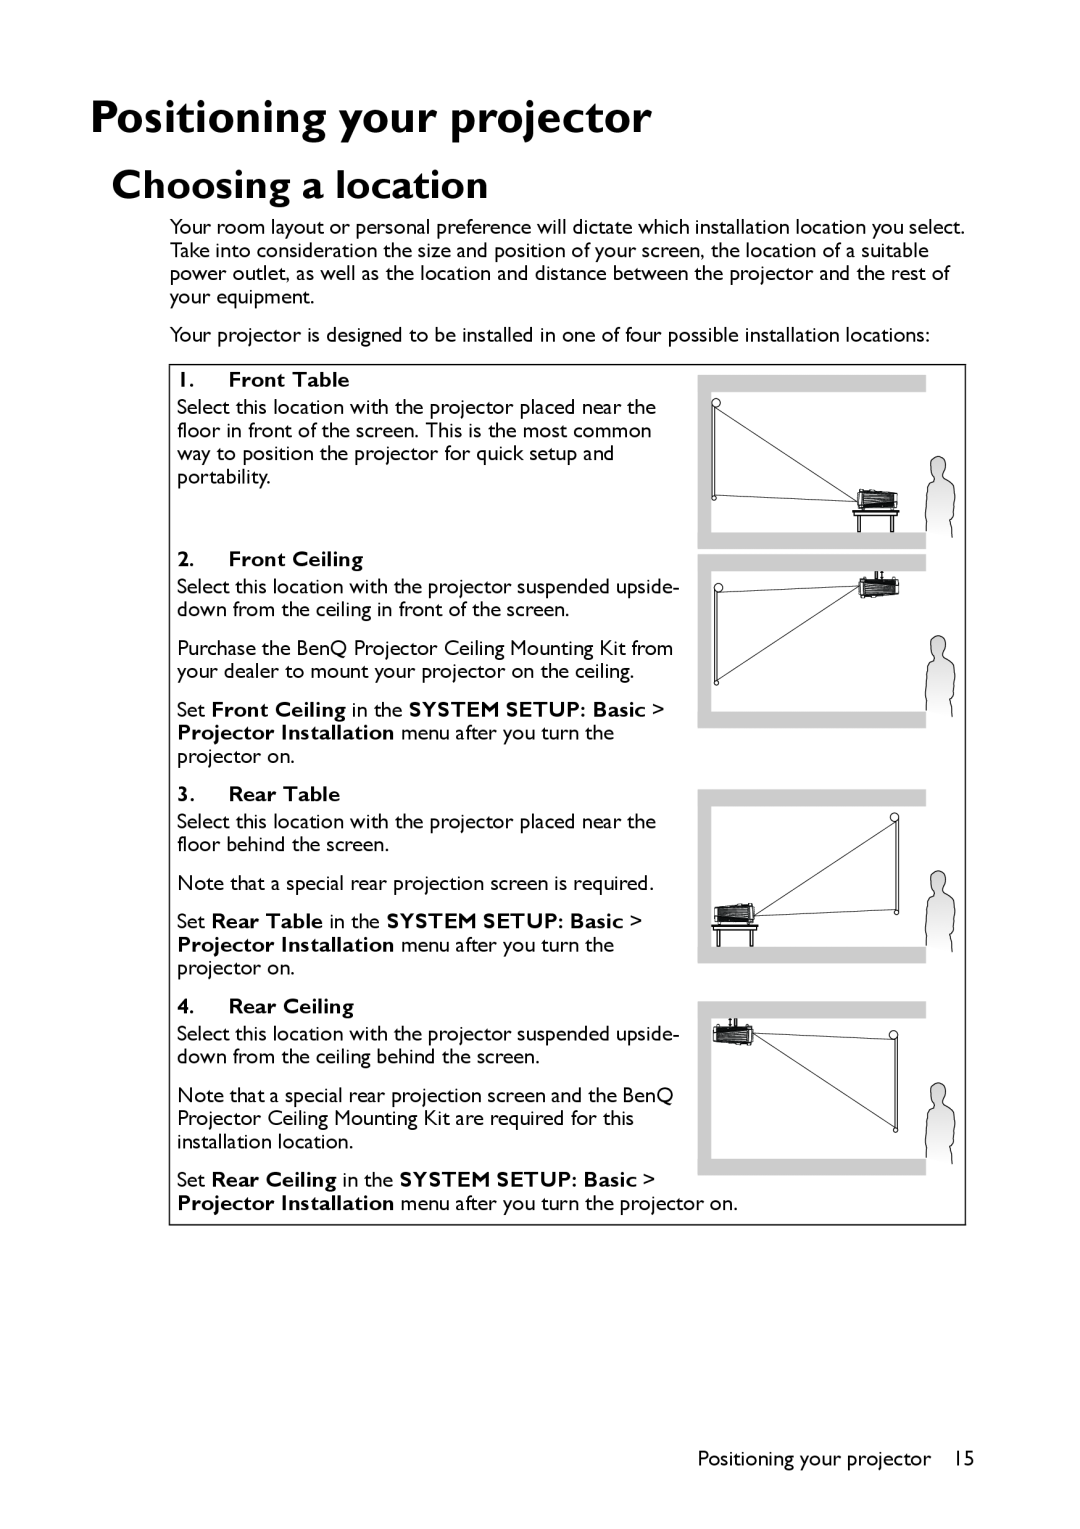 BenQ MS521 user manual Positioning your projector, Choosing a location 